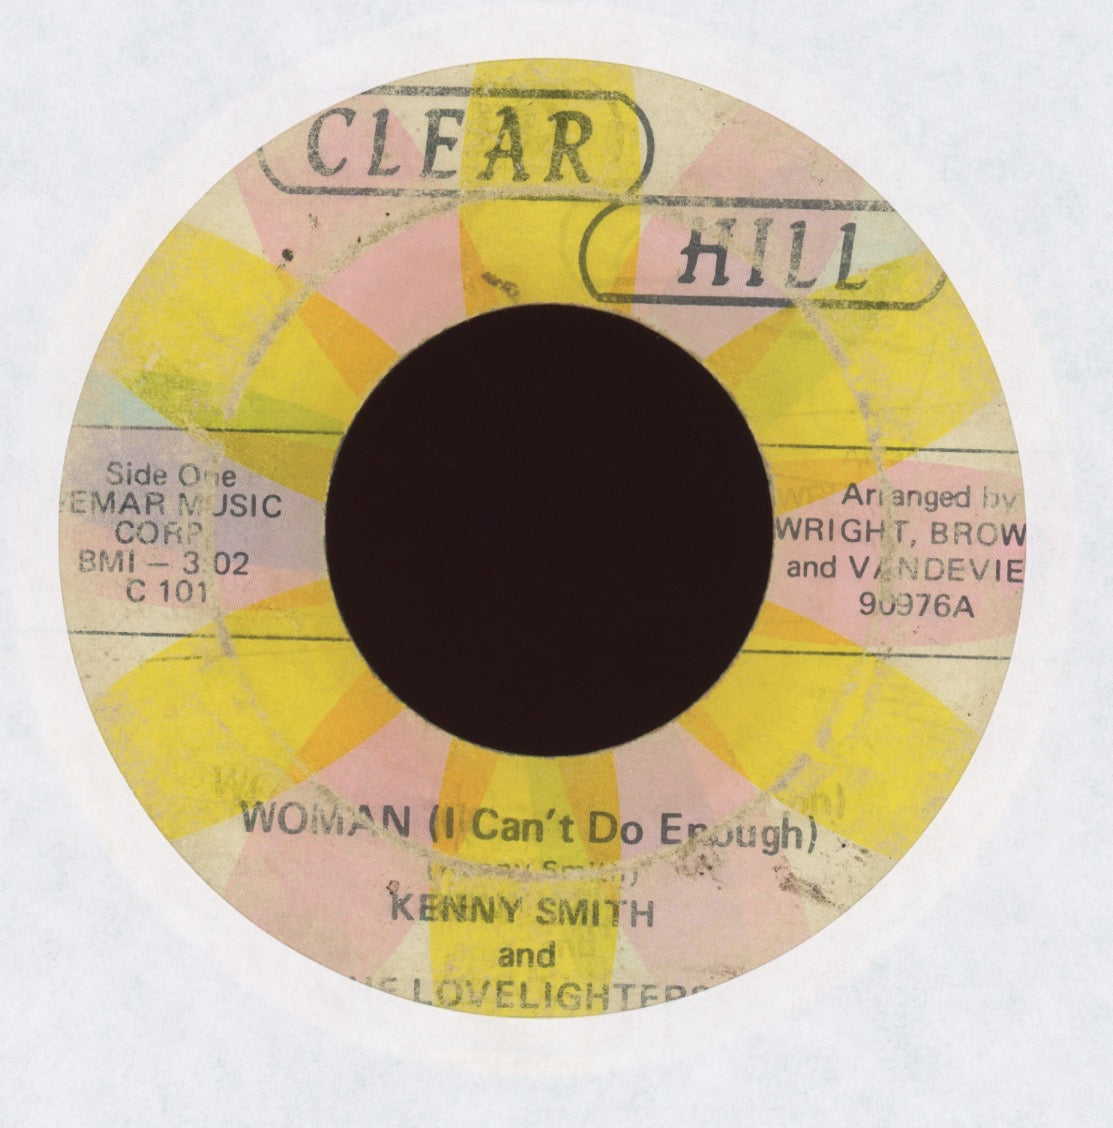 Kenny Smith & The Loveliters - Woman (I Can't Do Enough) on Clear Hill